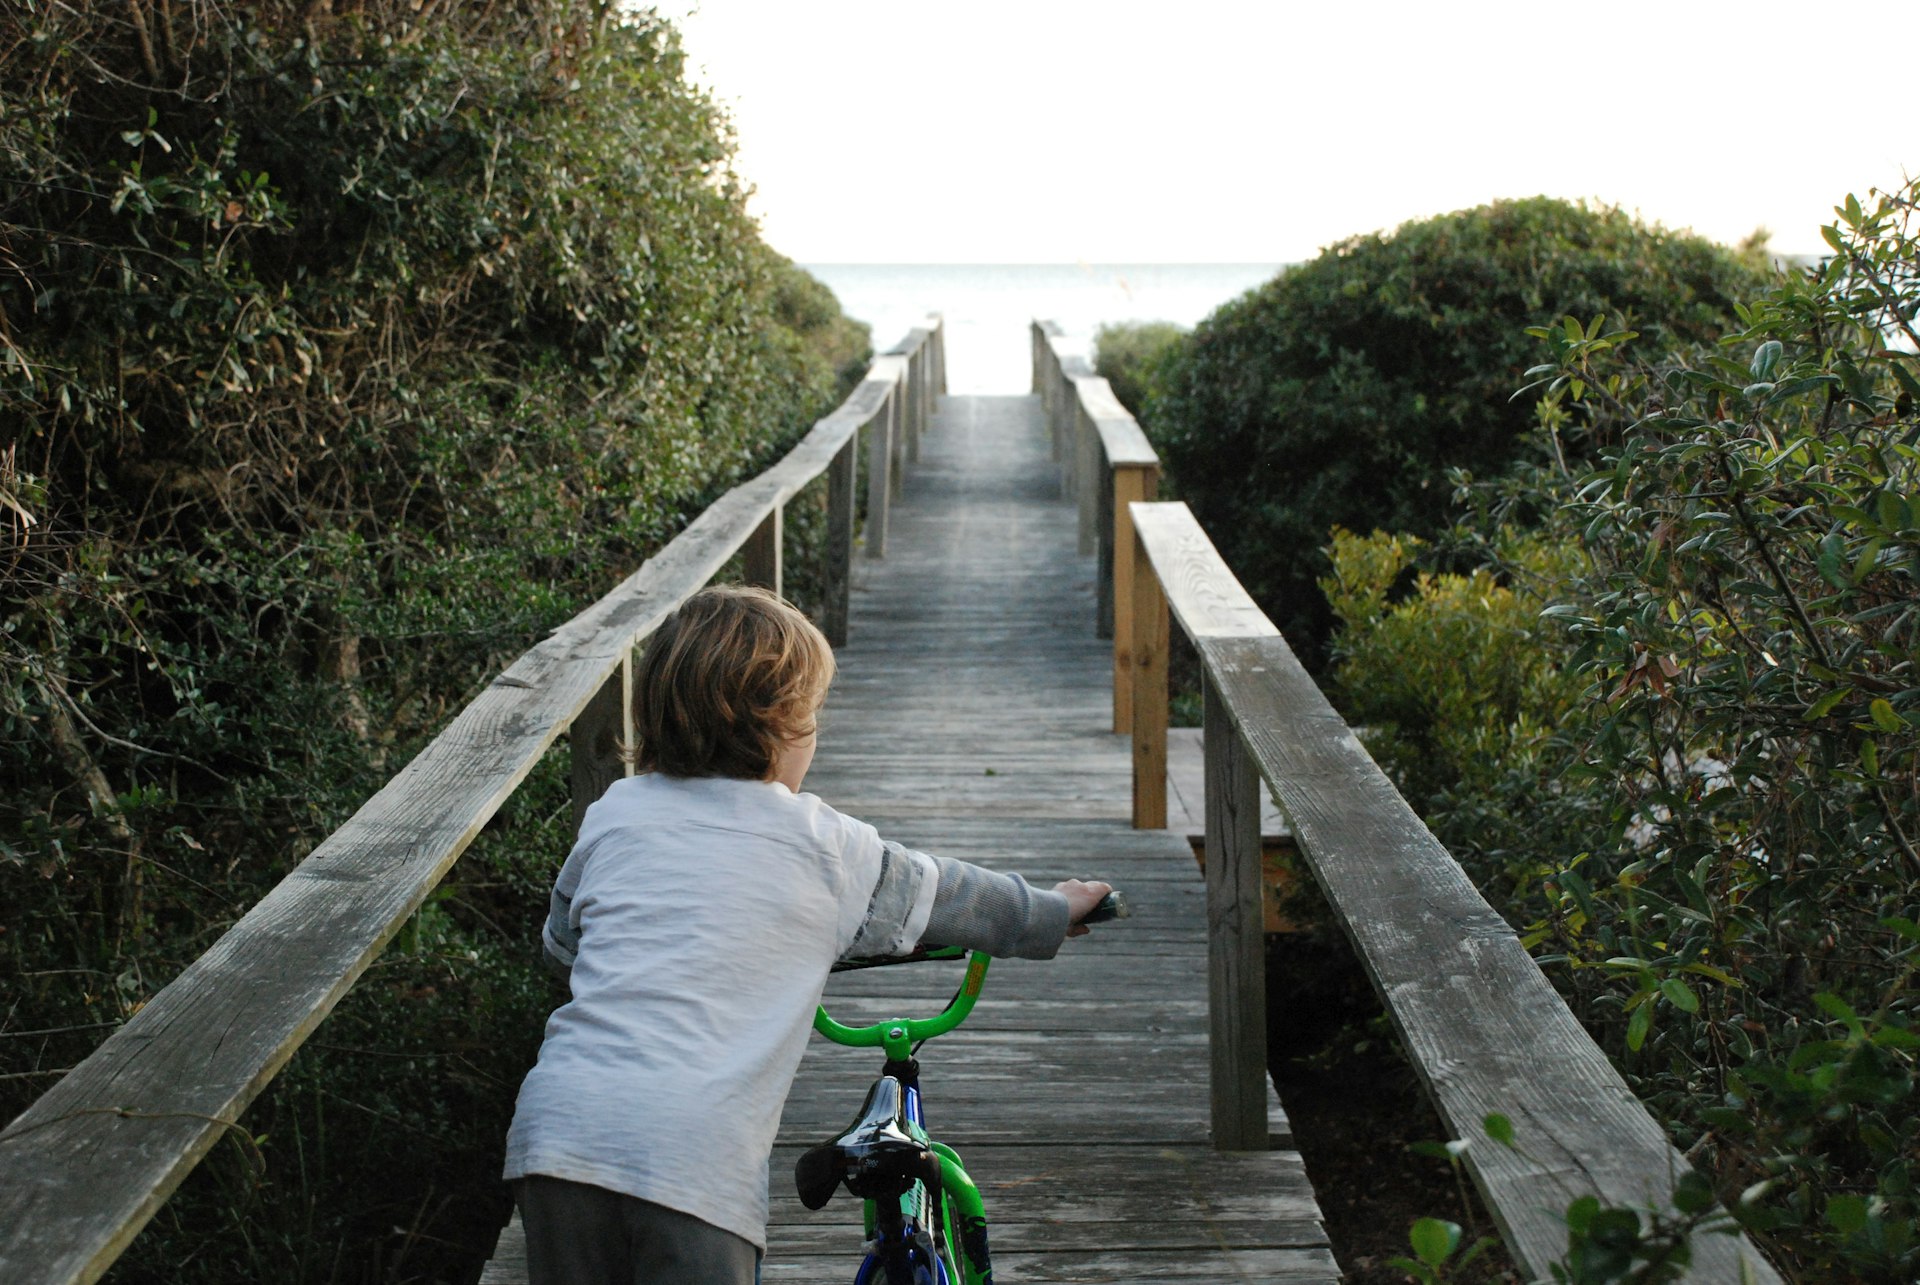 Young boy pushing his bike down a long wooden boardwalk with the ocean in the background, Hilton Head, South Carolina, USA